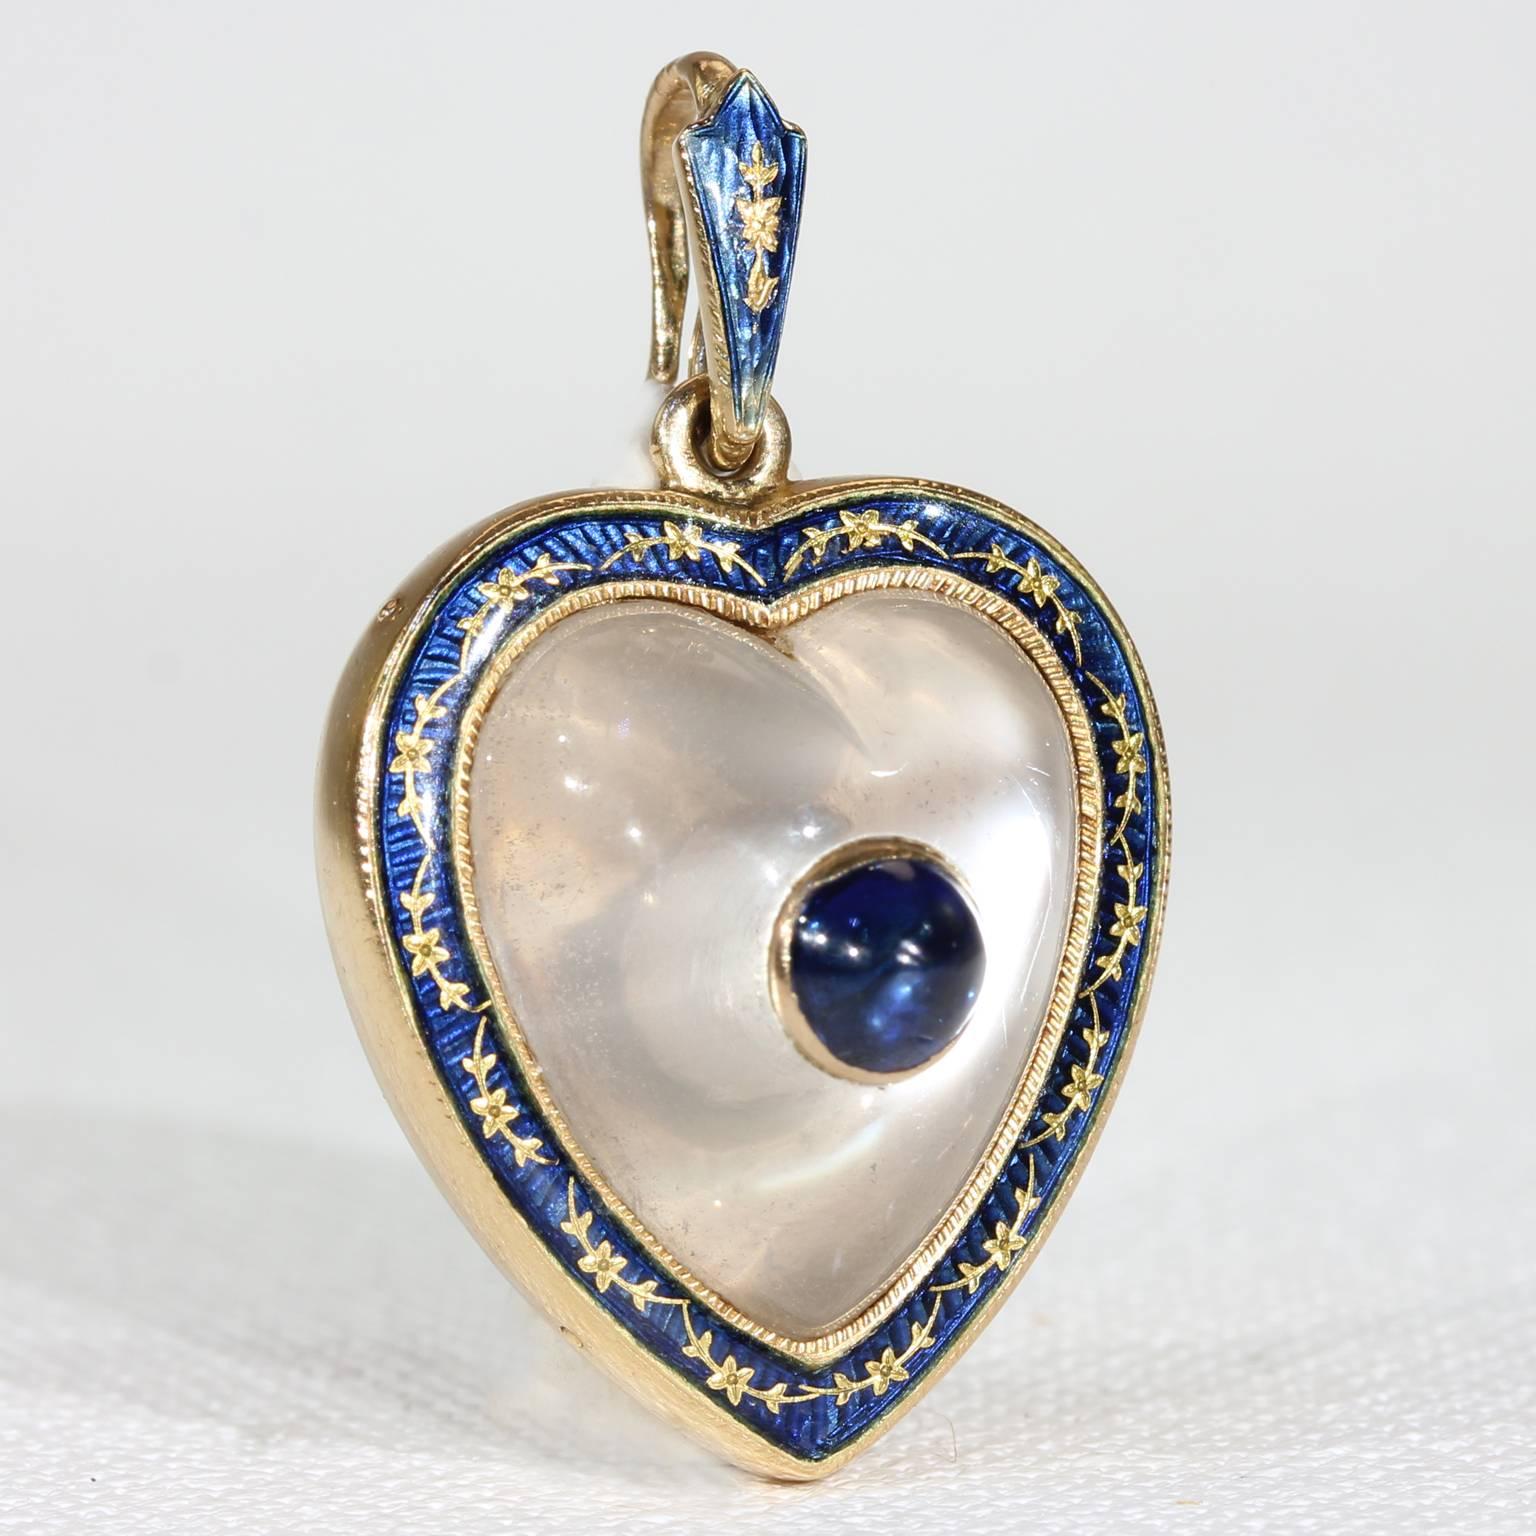 This elegant antique Victorian moonstone heart pendant was handcrafted around 1890, most likely in America. It was made in 14 karat gold and features a pretty blue cabochon cut sapphire which has been bezel set into the center of moonstone. The